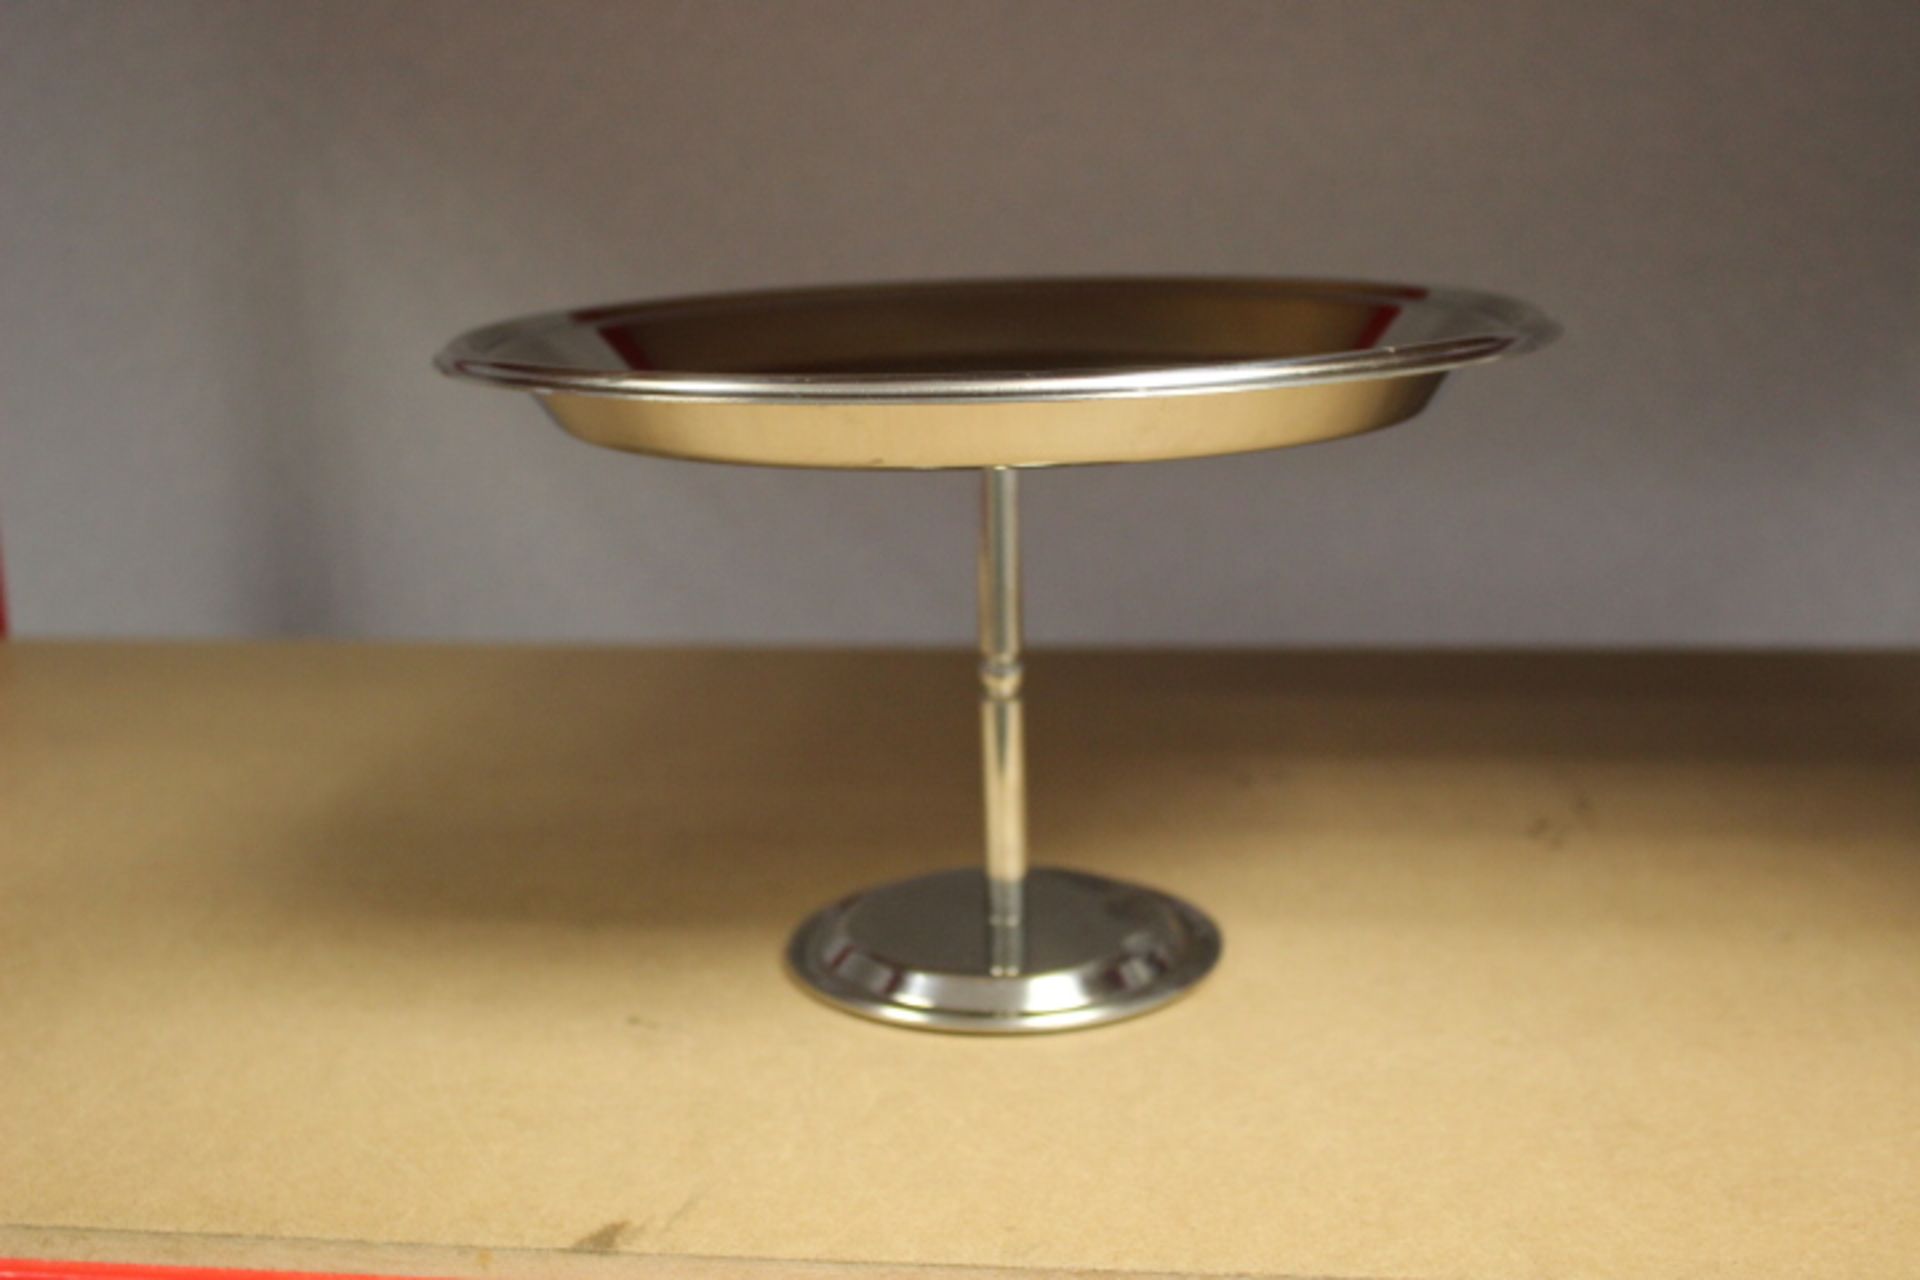 Mepra 24 cm Petit-Fours Stand with Base, Silver - Image 2 of 3